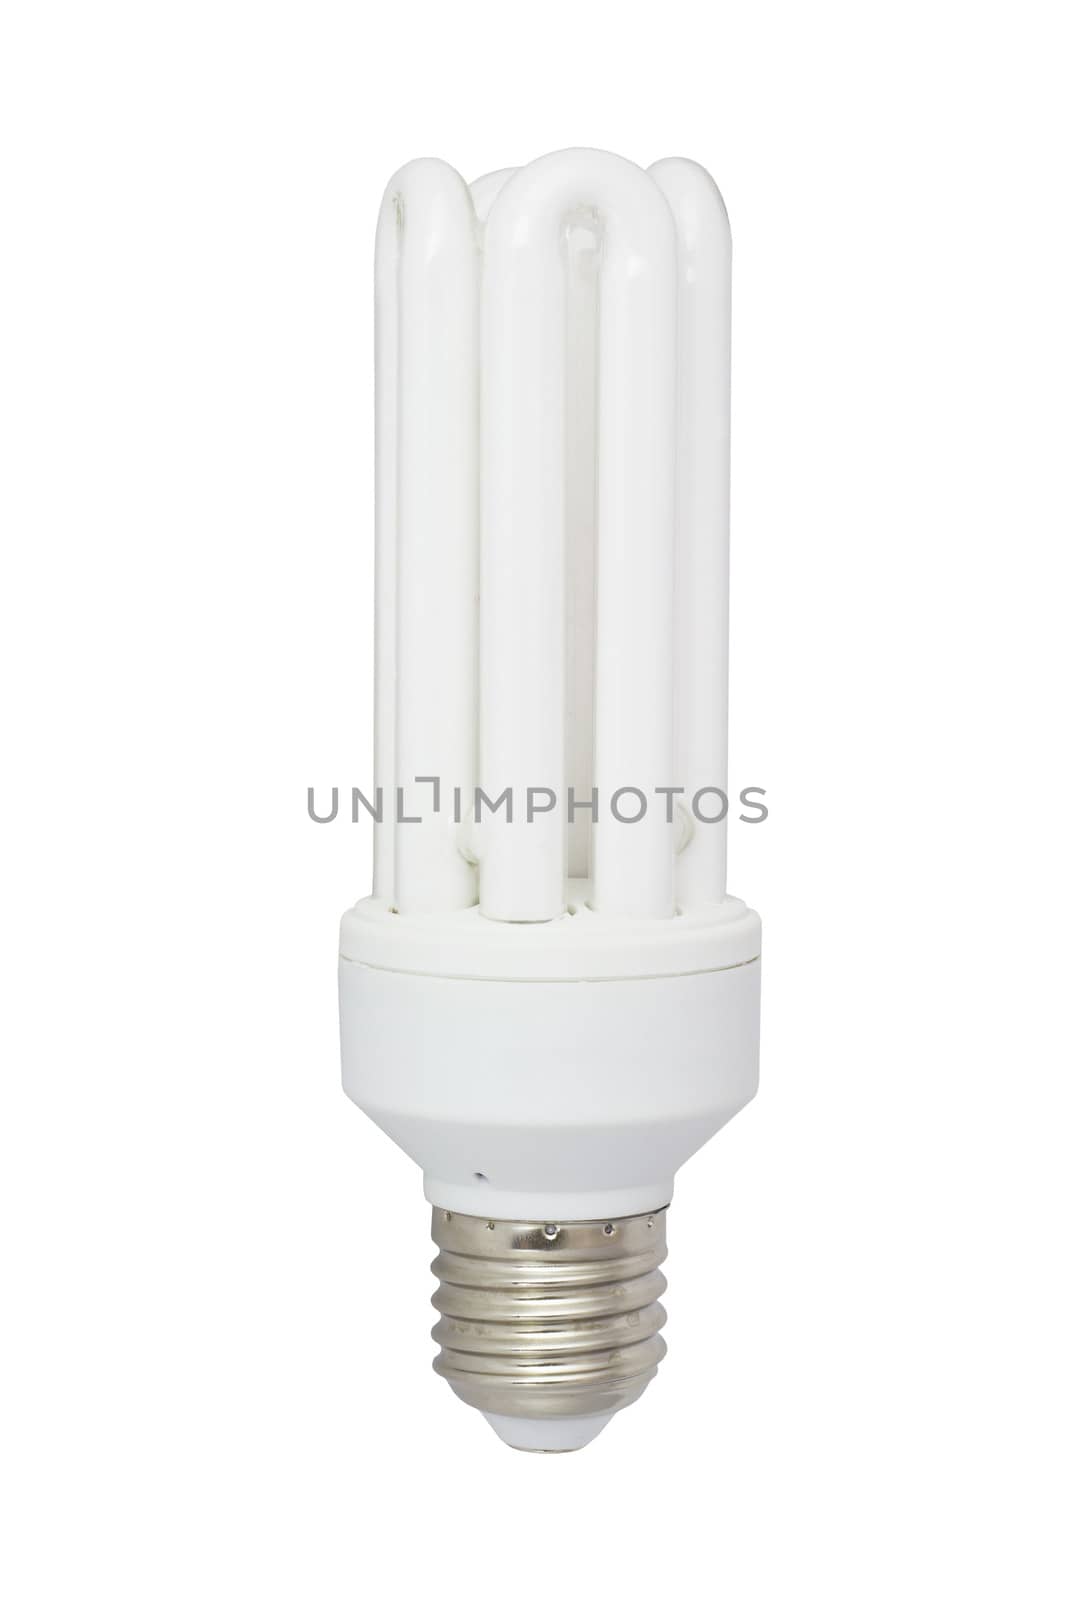 White fluorescent lamp. Isolated on the white background